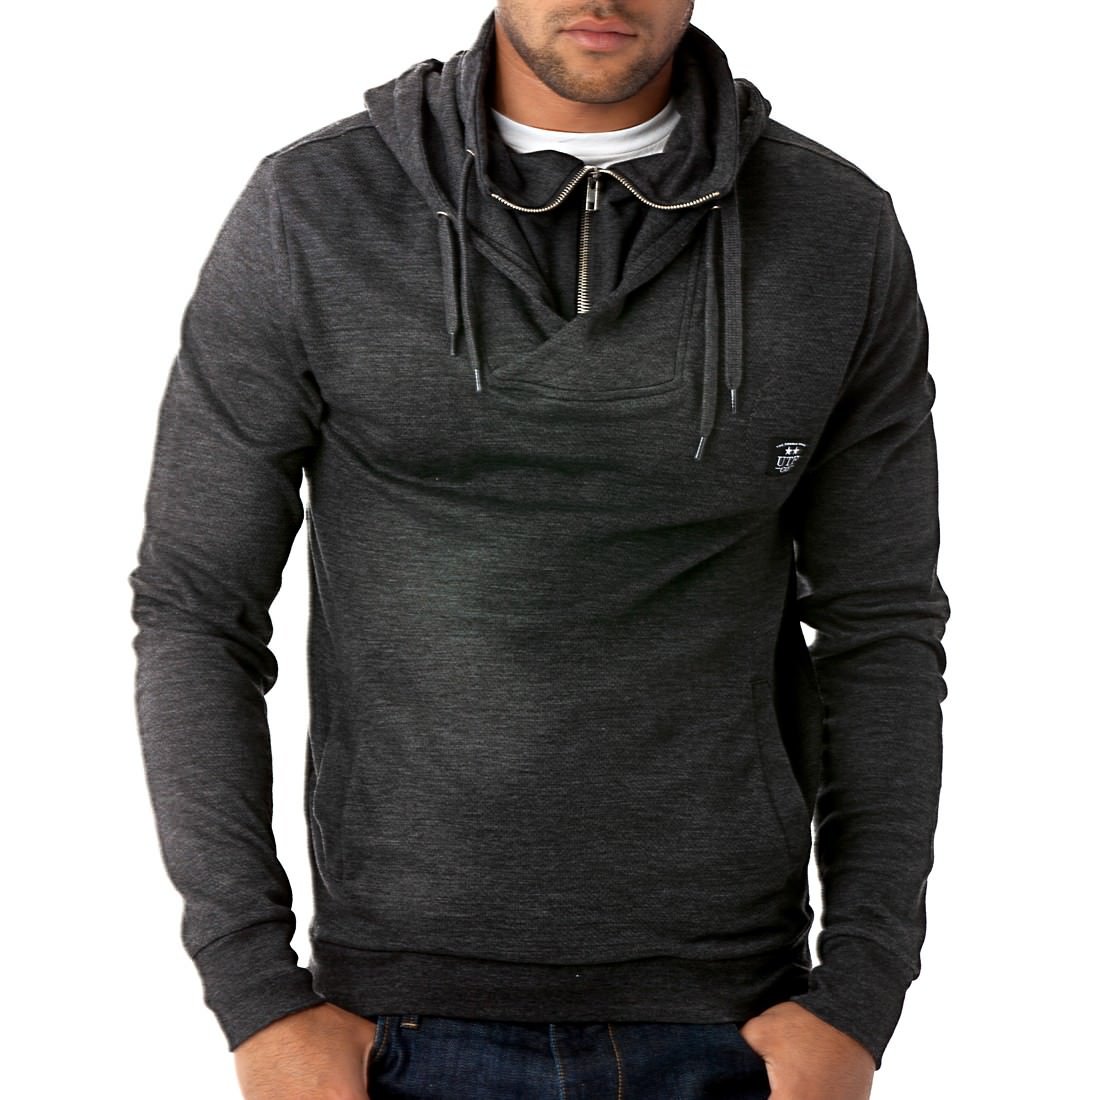 Pull Over Hoody by Under 2 Flags